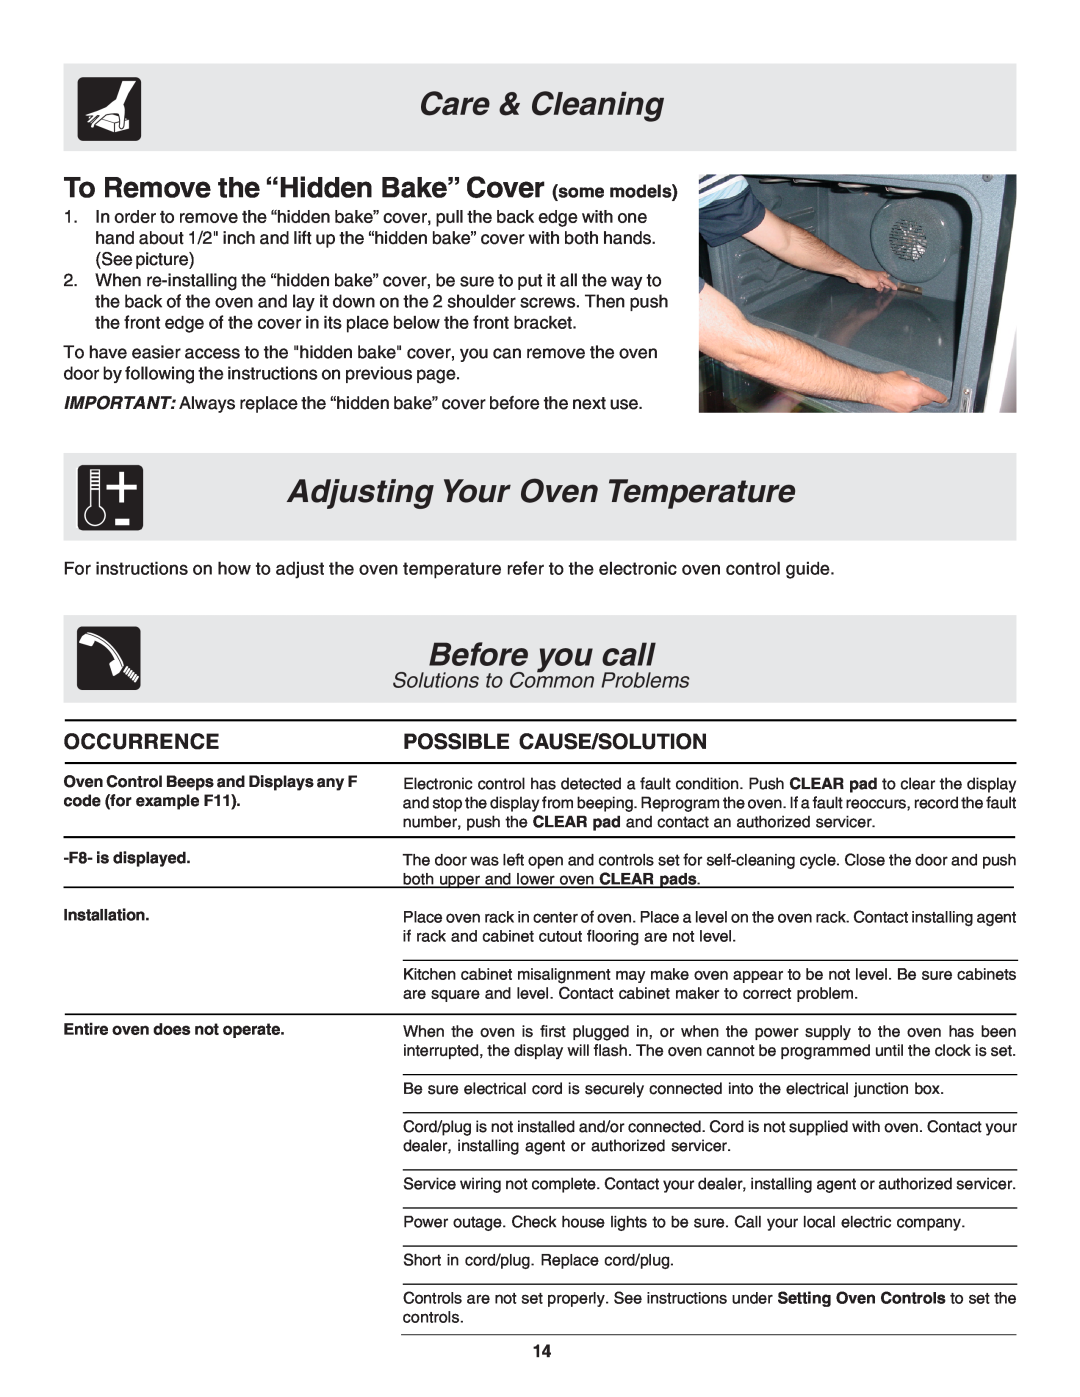 Frigidaire 318200943 Adjusting Your Oven Temperature, Before you call, To Remove the “Hidden Bake” Cover some models 